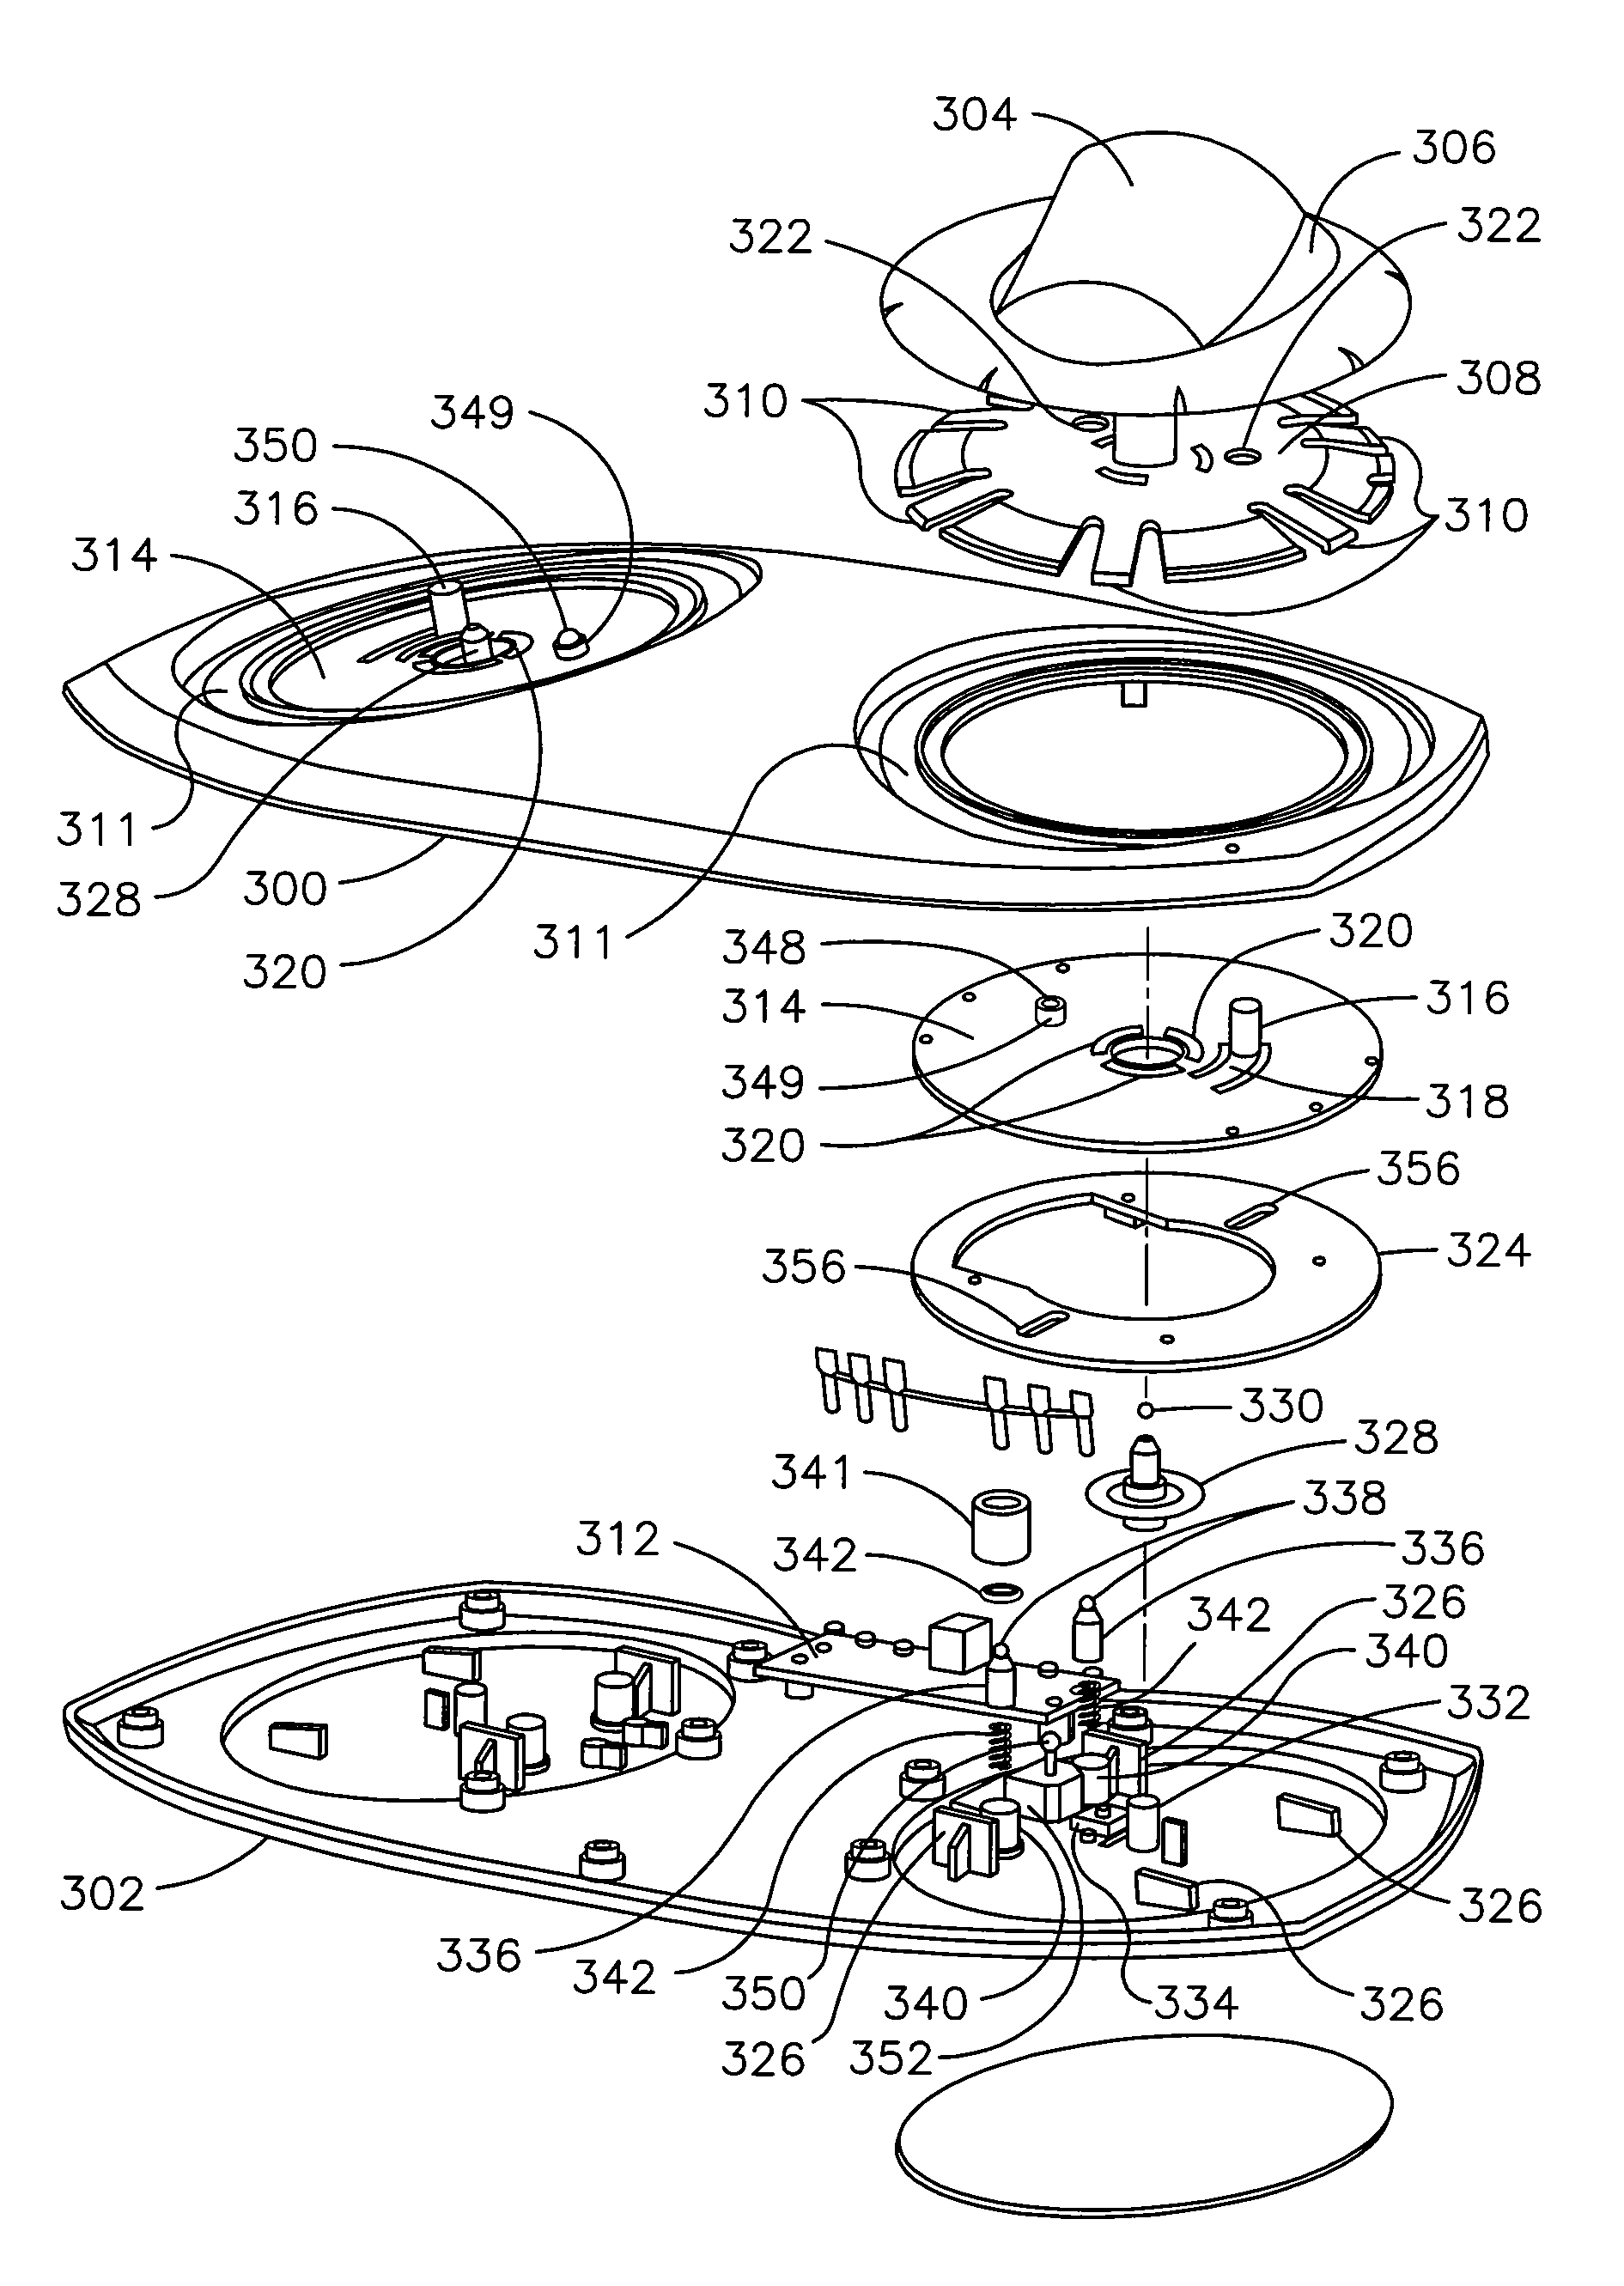 Apparatus and method for generating data signals